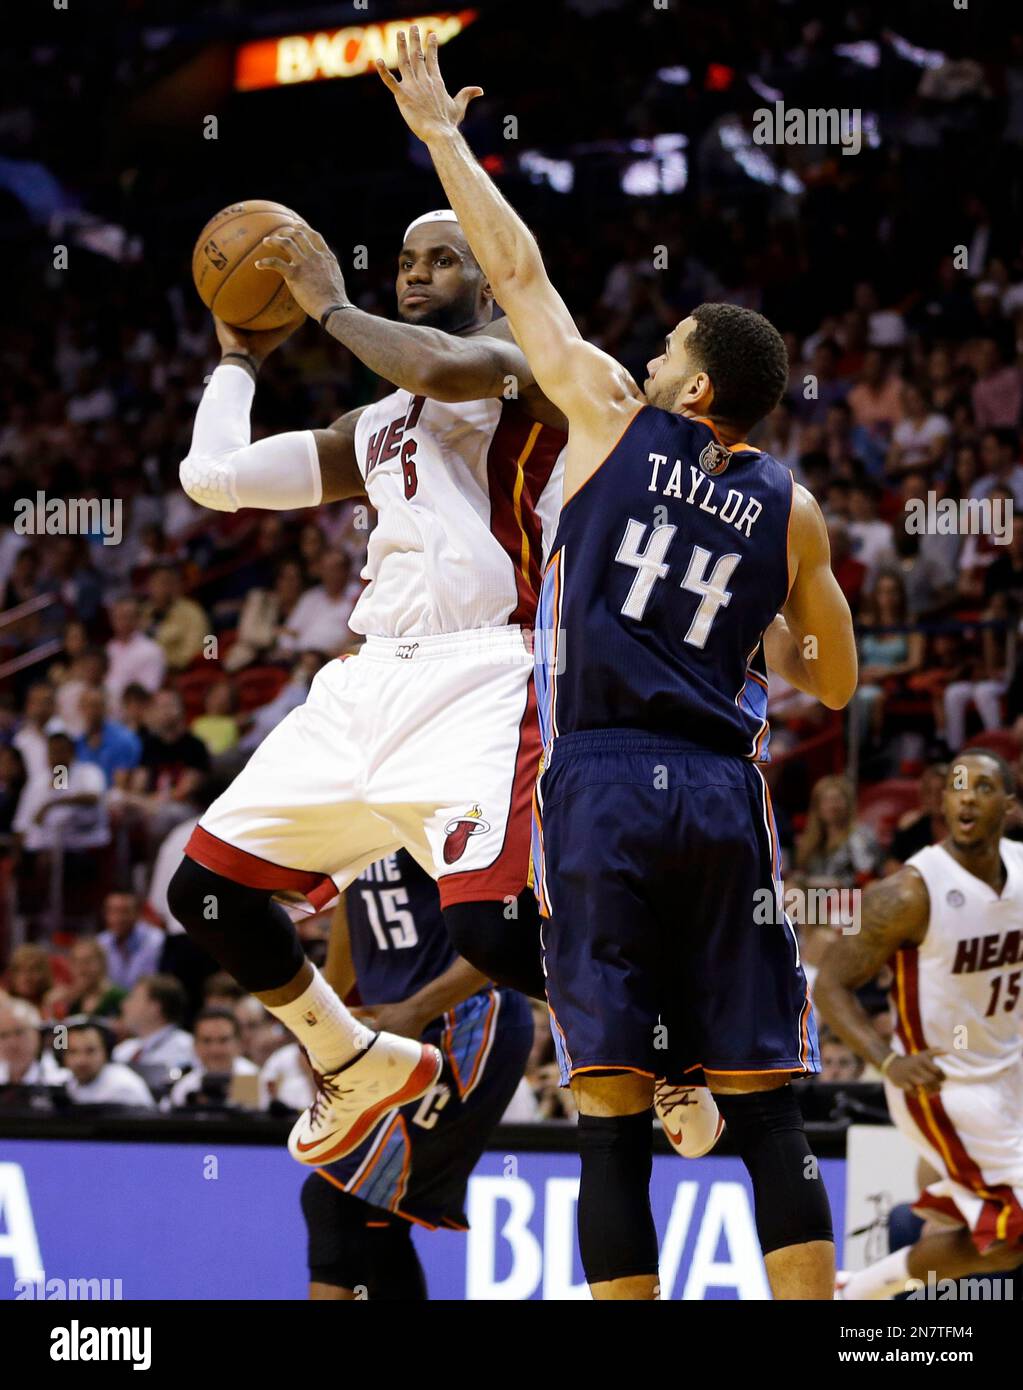 Charlotte Bobcats' Jeff Taylor (44) defends against Miami Heat's LeBron ...